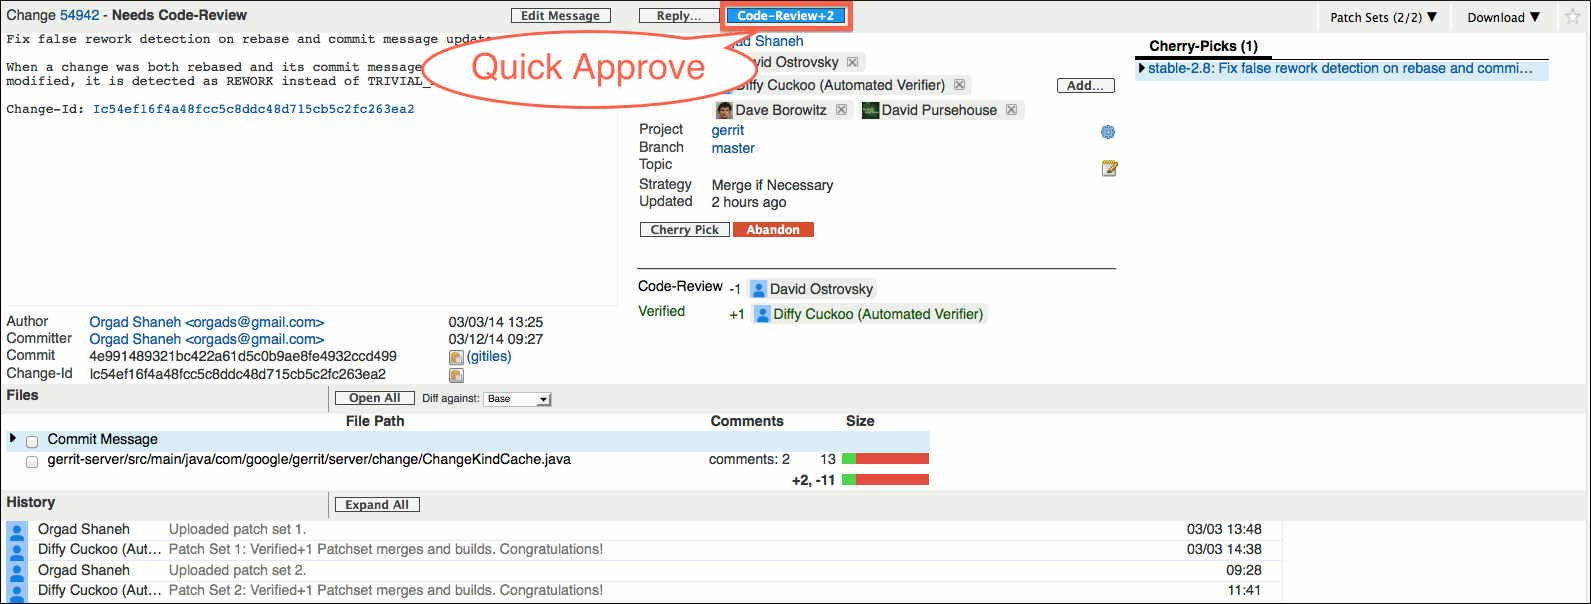 images/user-review-ui-change-screen-quick-approve.png